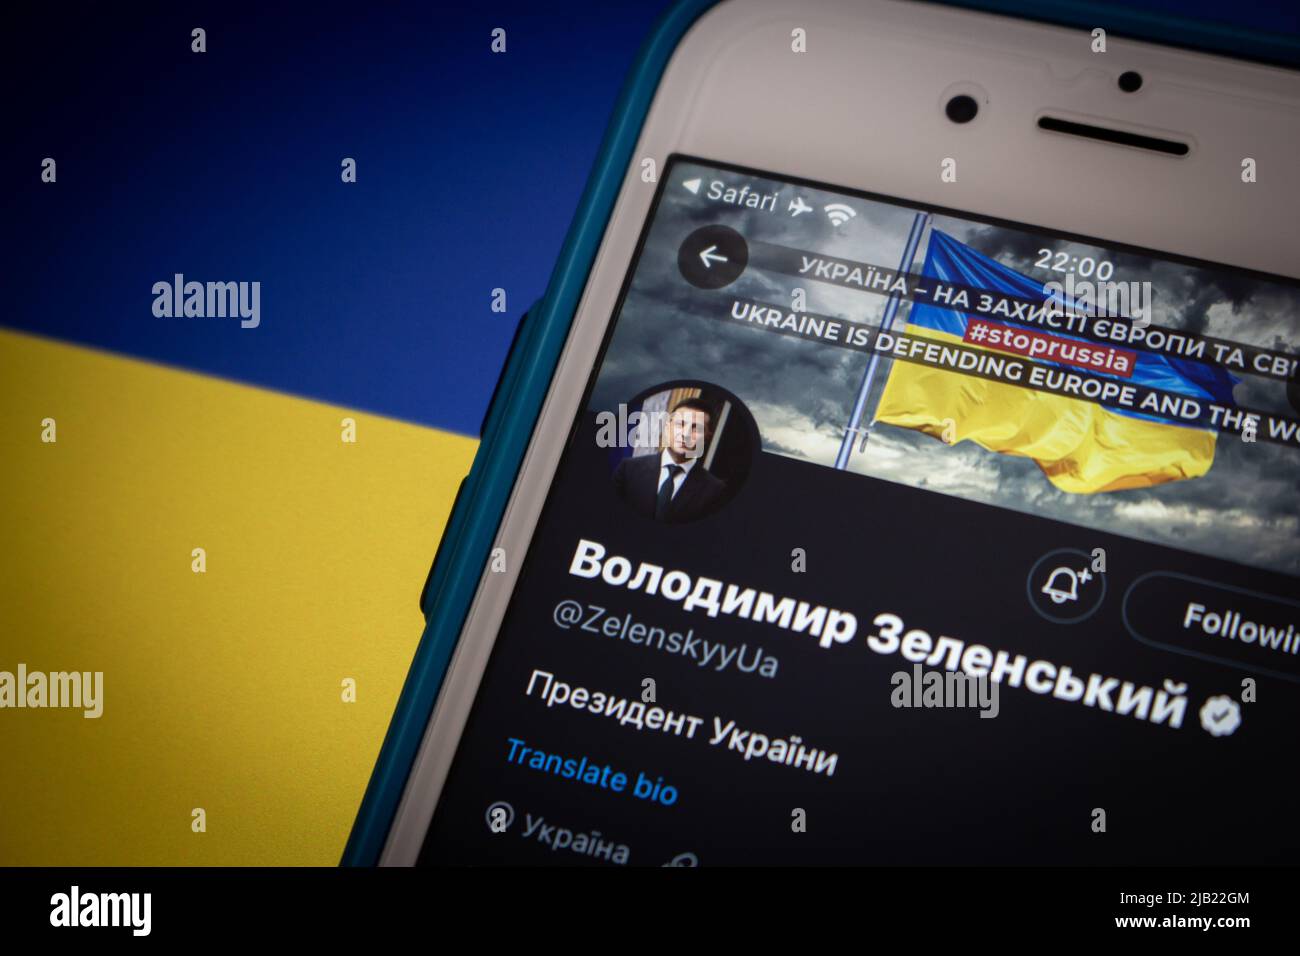 Twitter account of Volodymyr Zelenskyy, the 6th & incumbent president of Ukraine (former actor & comedian), on iPhone on an Ukraine flag in dark mood Stock Photo